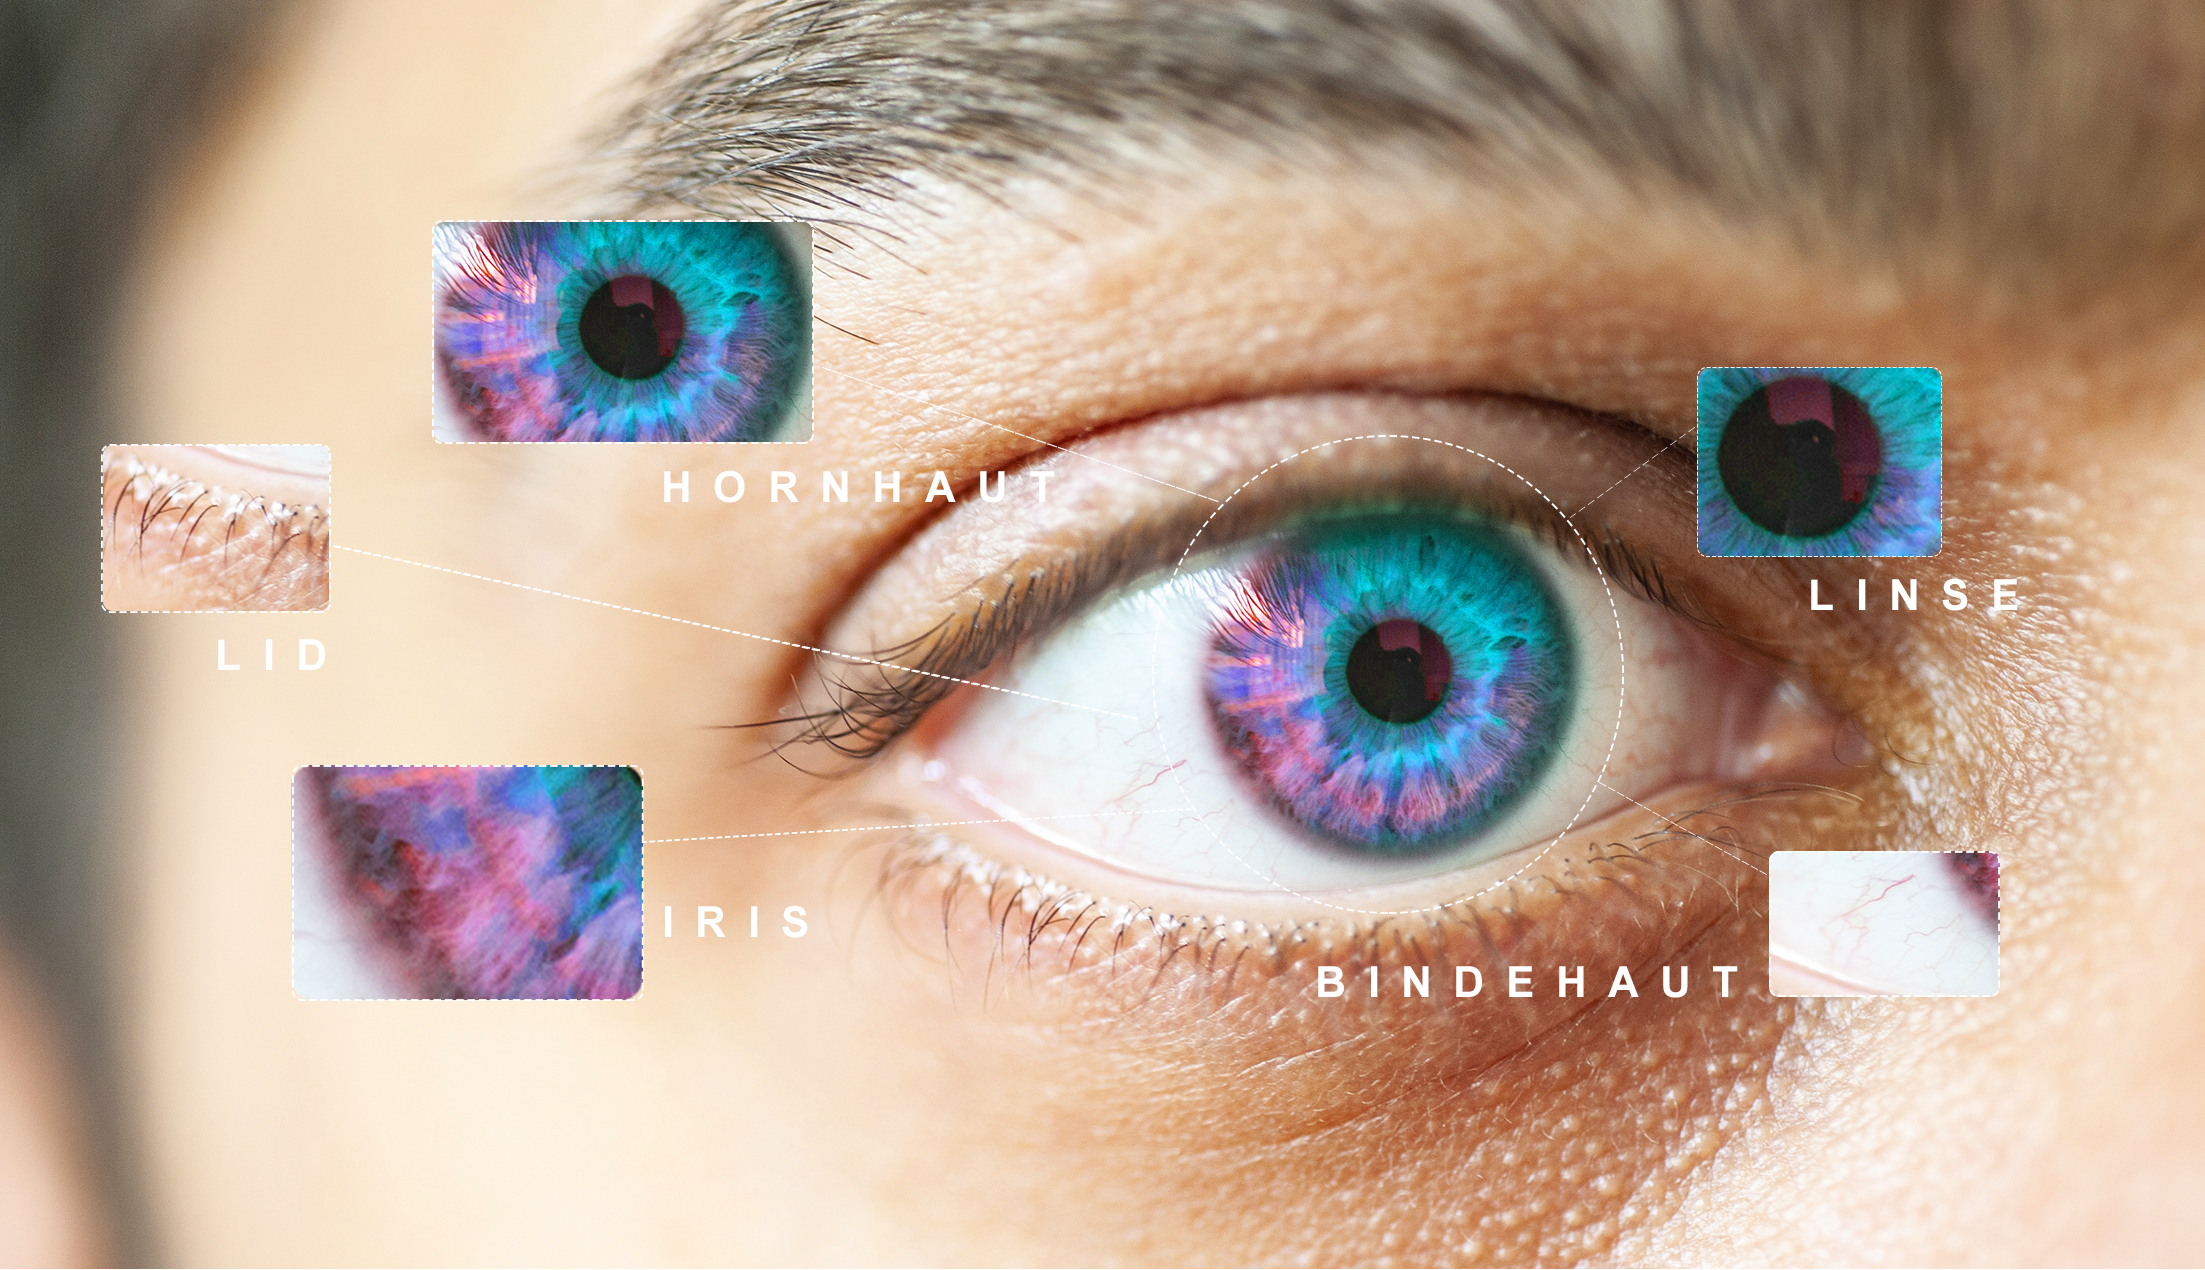 Eye conditions and treatment options